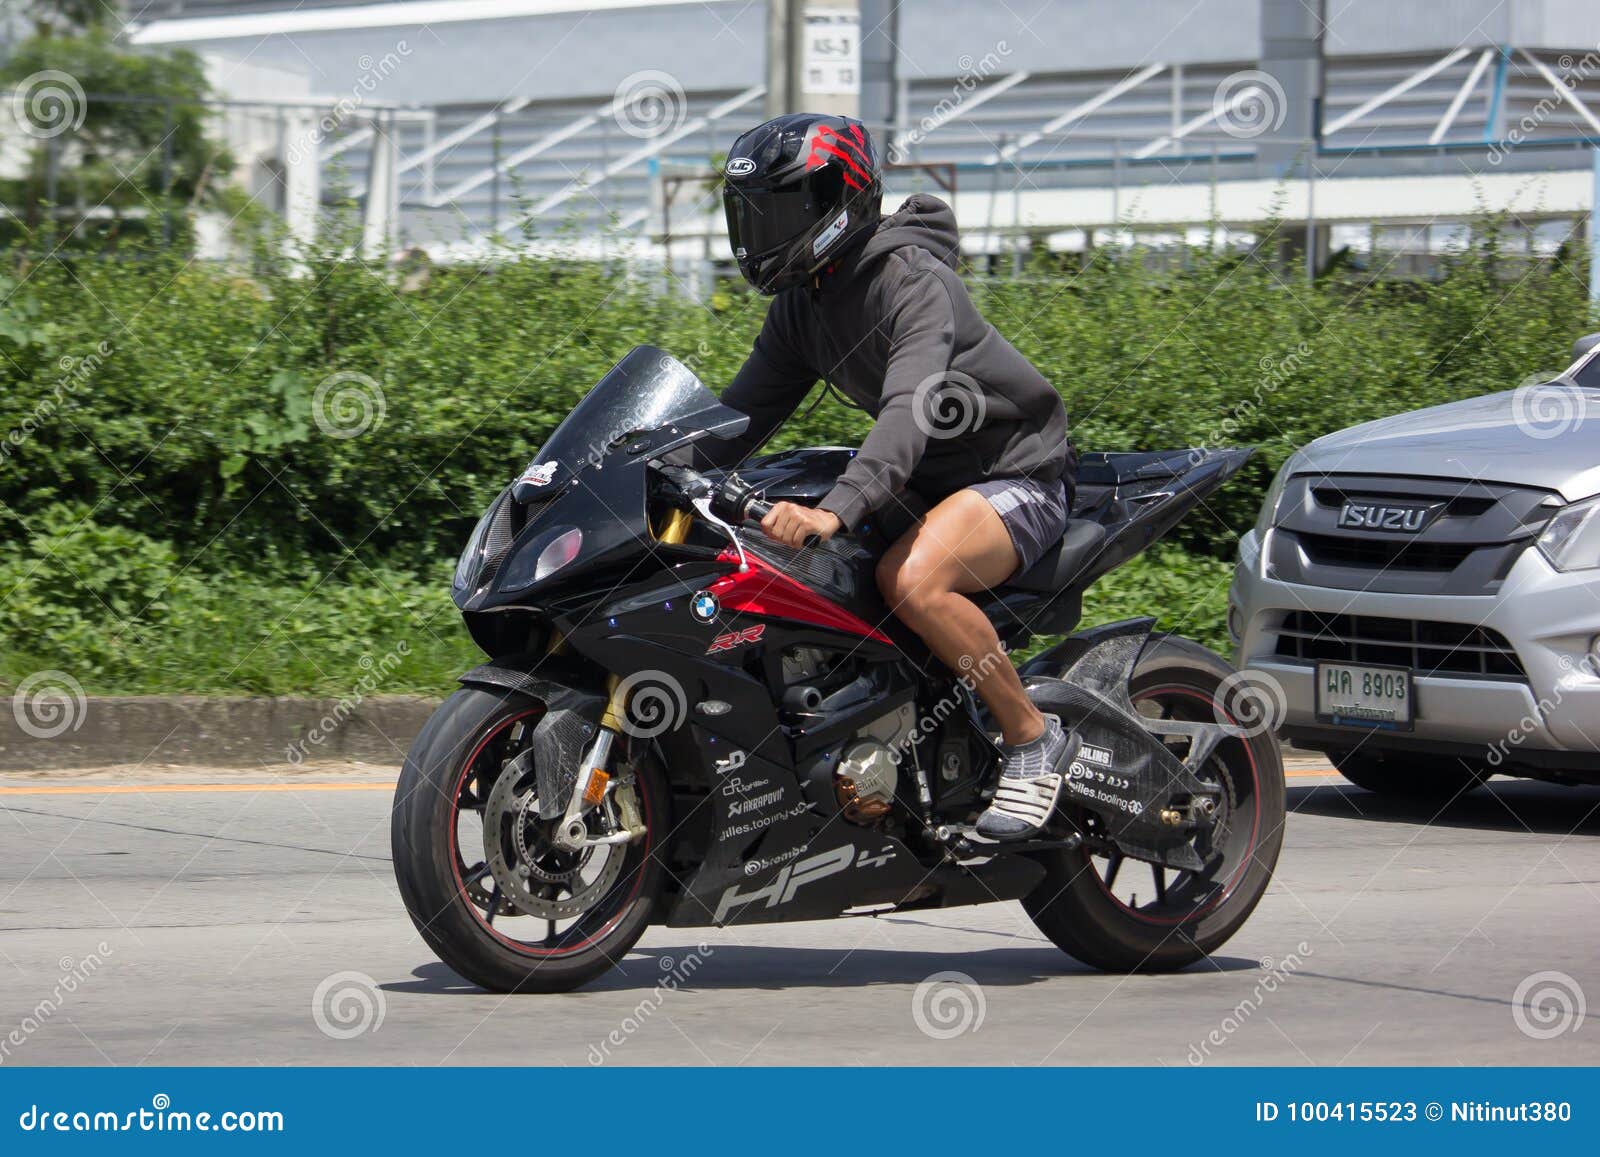 Private Bigbike BMW S1000 RR Motorcycle. Editorial Stock Photo - Image